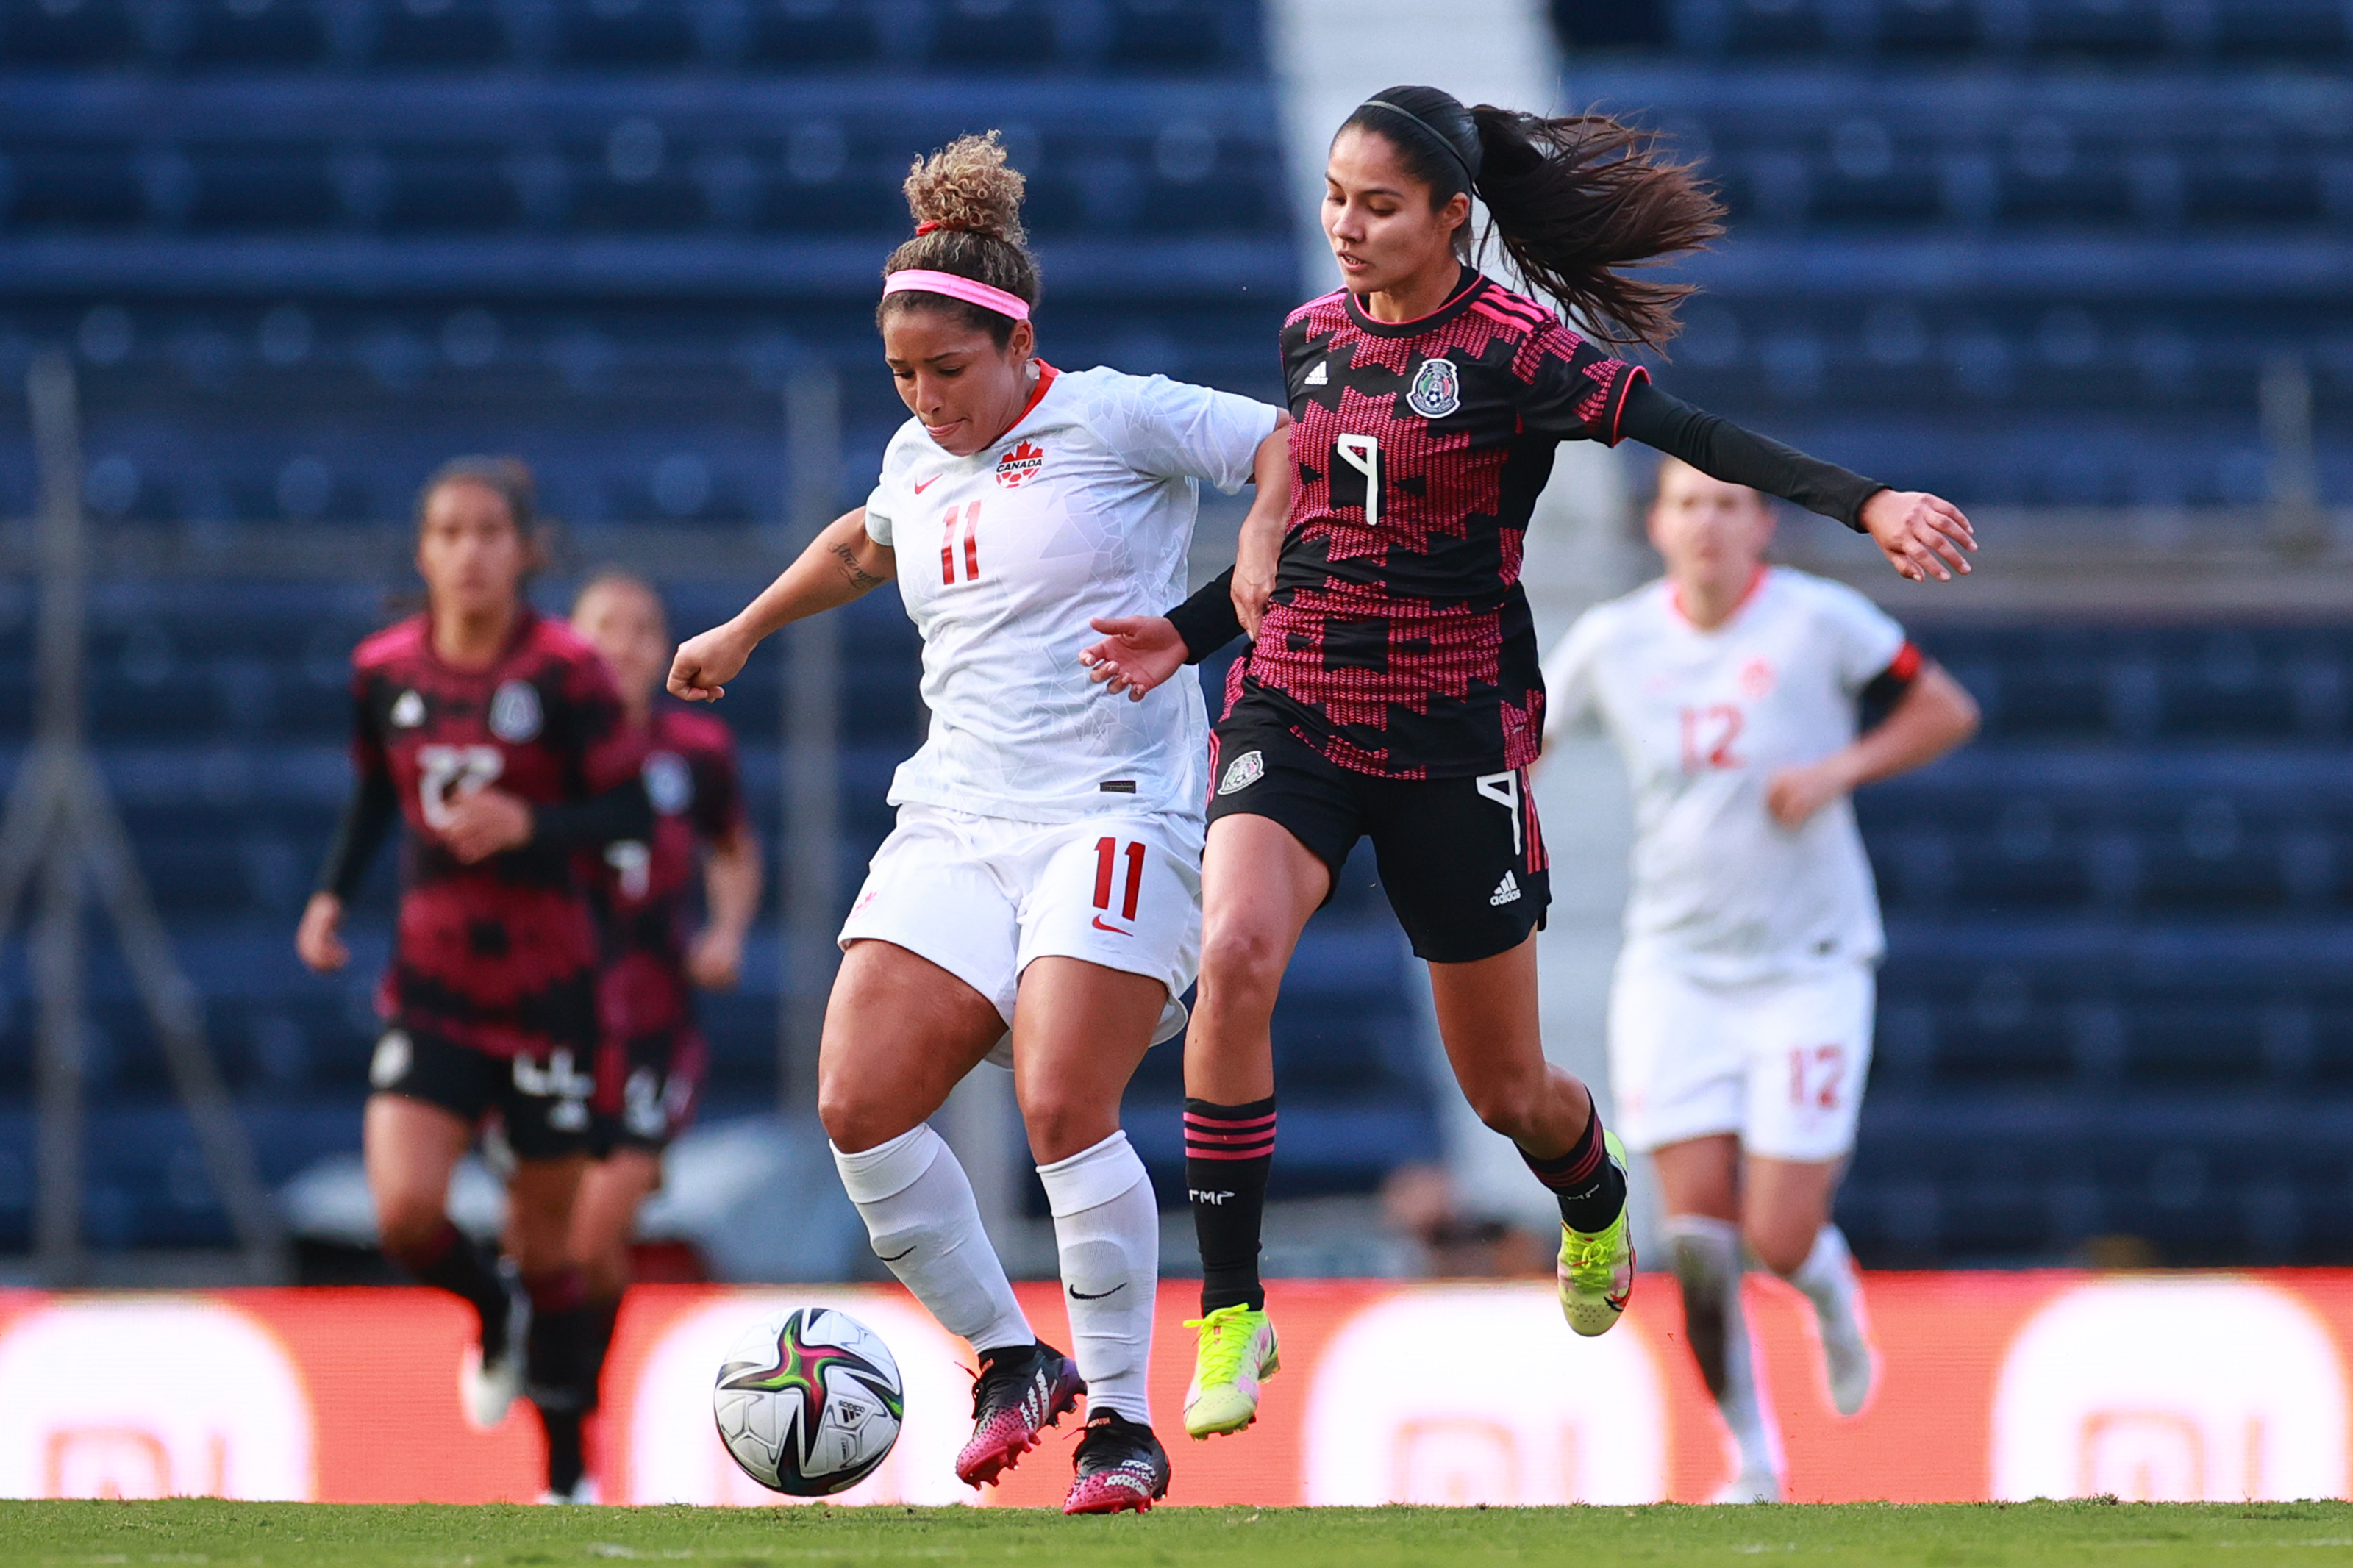 Desiree Scott of Canada battles for possession with Alison Gonzalez of Mexico during the Women’s International Friendly between Mexico and Canada at Estadio Ciudad de los Deportes on November 30, 2021 in Mexico City, Mexico.